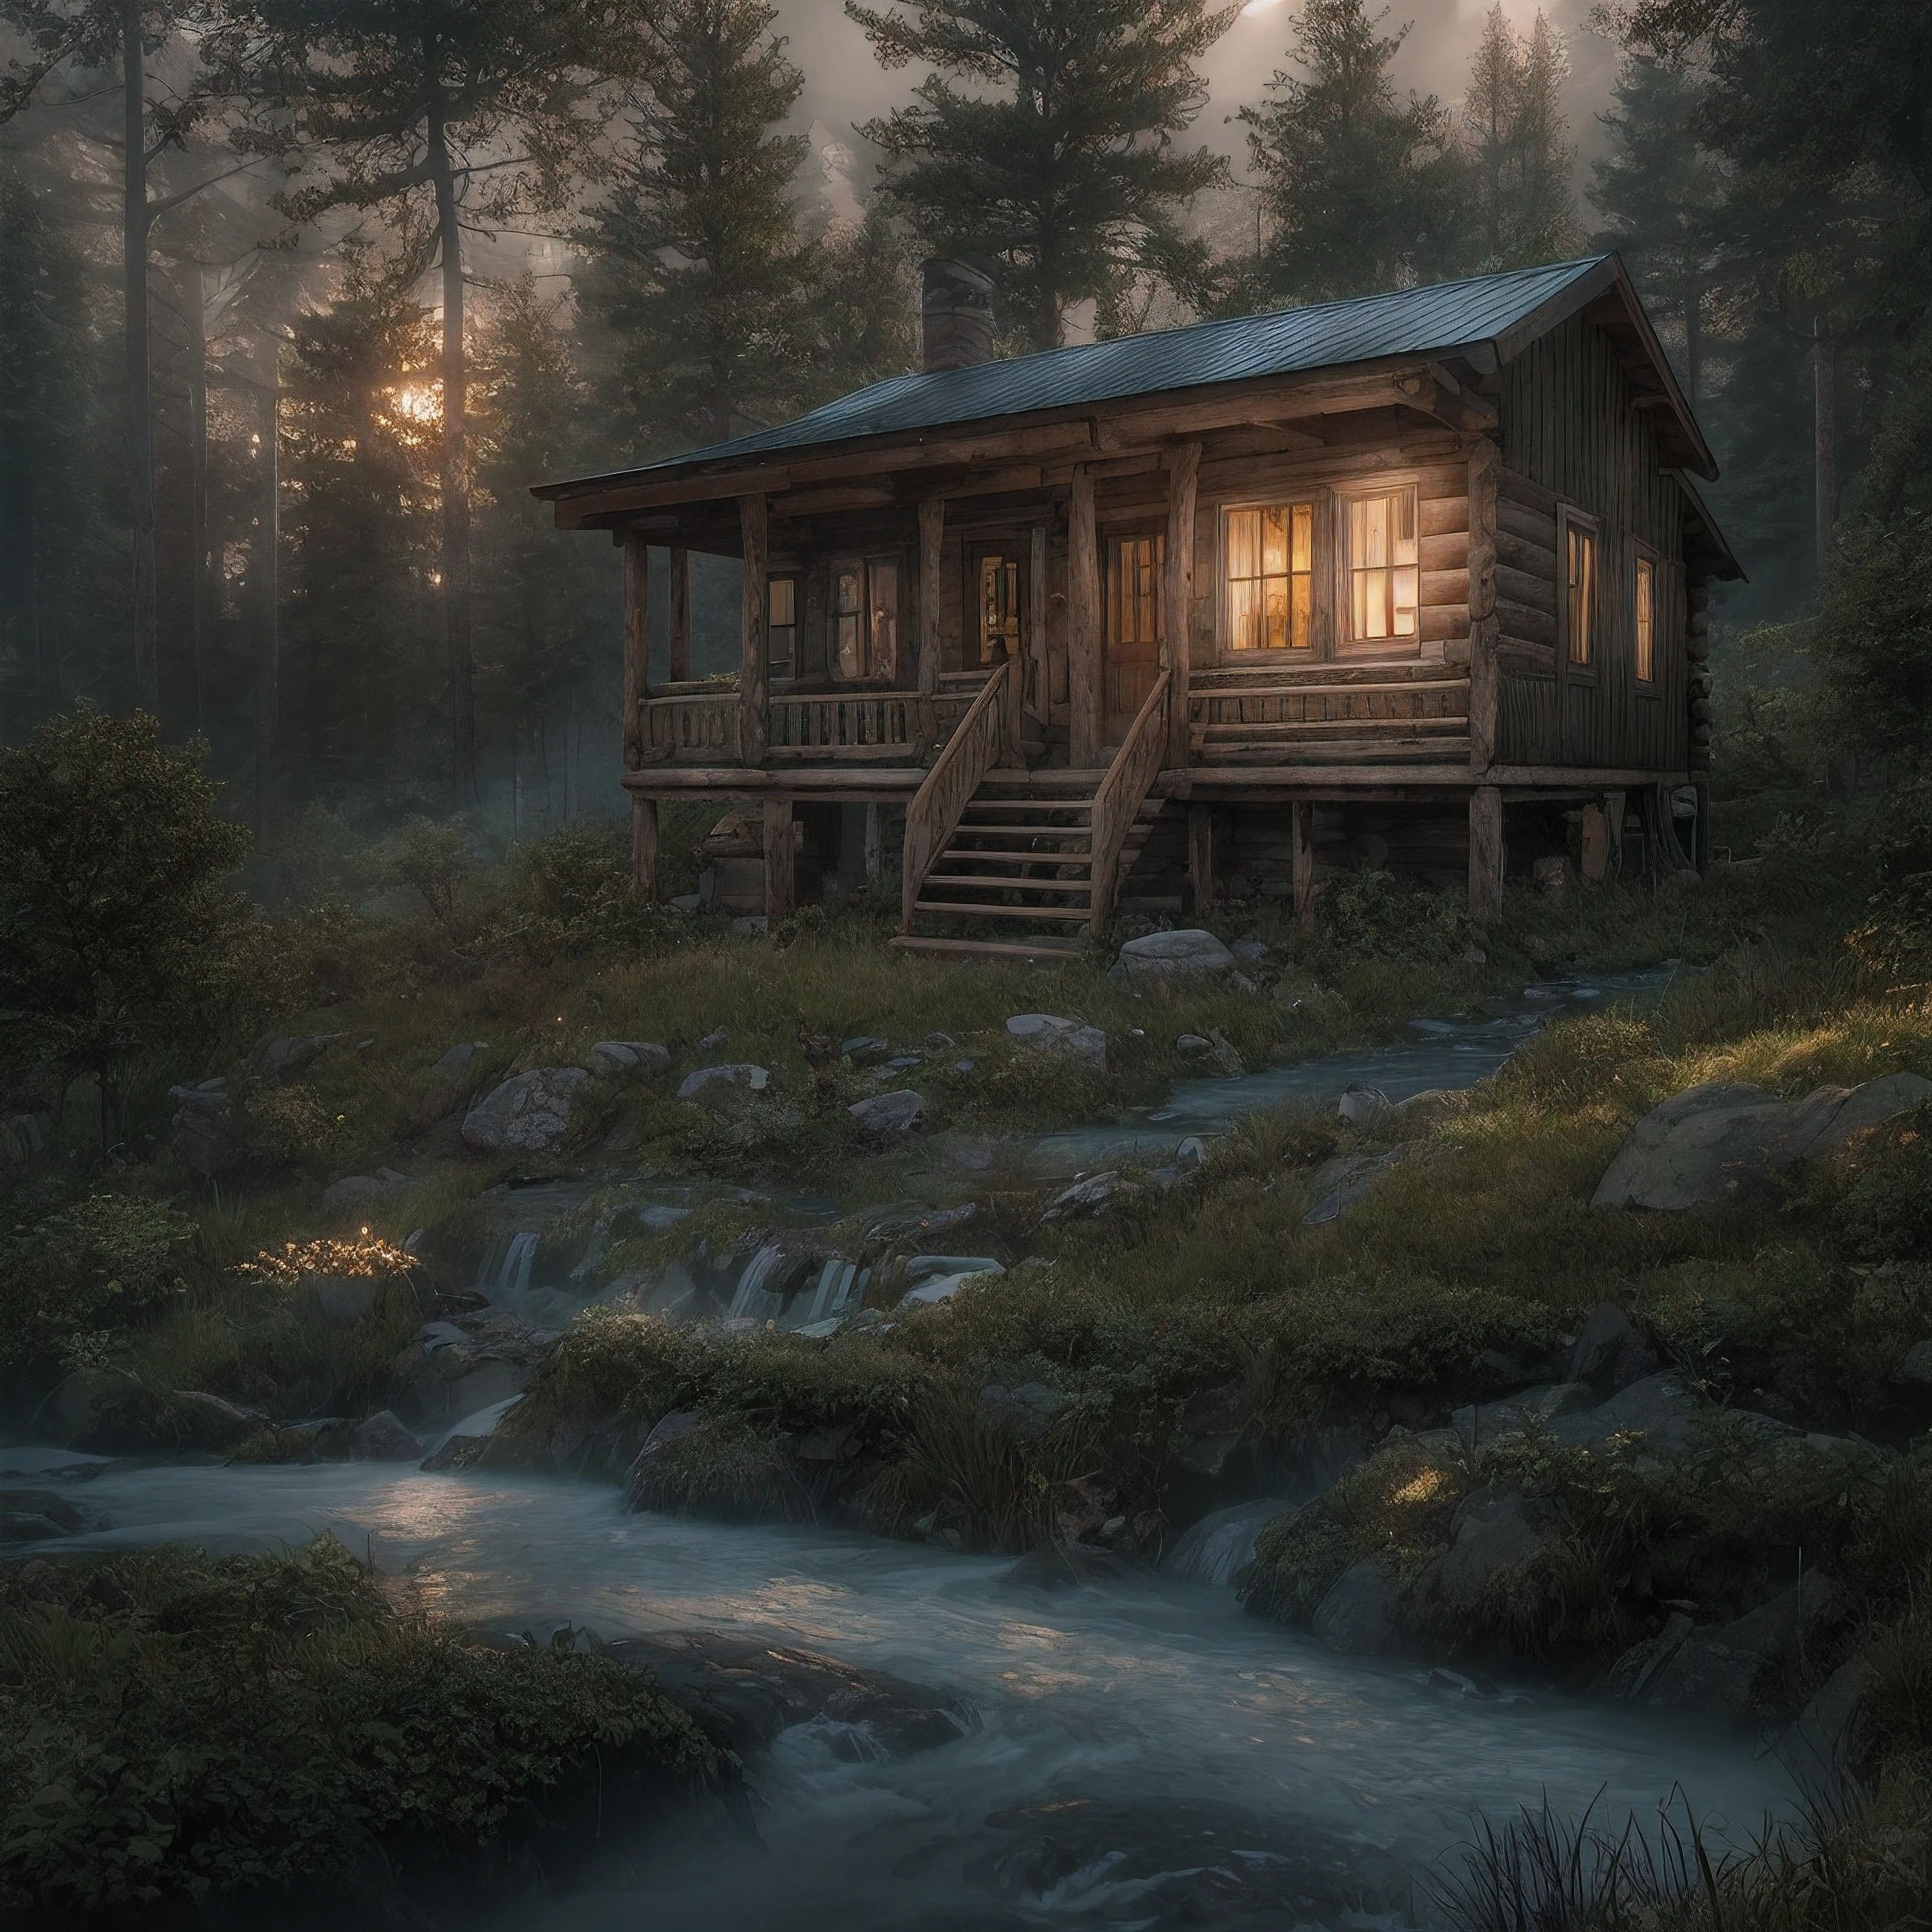 As the light began to fade, an old log cabin was spotted in a small clearing ahead. The cabin's roof shimmered in the fading sunlight. The log cabin was located near a quaint steampunk village, nestled within the rugged wilderness.
Upon approaching the cabin, one could sit on the bottom porch steps, resting their hands on their knees. From this vantage point, a peaceful scene could be taken in as the day came to an end. The natural beauty of the surroundings evoked a sense of calm.
The steampunk village provided a glimpse into an imaginative world, with its unique architecture and retro-futuristic technology. Though small and remote, it was a hub of innovation and creativity.
Beyond the village lay dense forests and rolling hills. The raw, rugged wilderness possessed a spirituality and timeless quality. The changing seasons transformed the landscape in dramatic ways.
As the last light of day faded, the porch of the cabin offered a place of respite and reflection, overlooking the village and natural world beyond. It was a serene spot to connect with nature and find inner peace as darkness slowly descended.